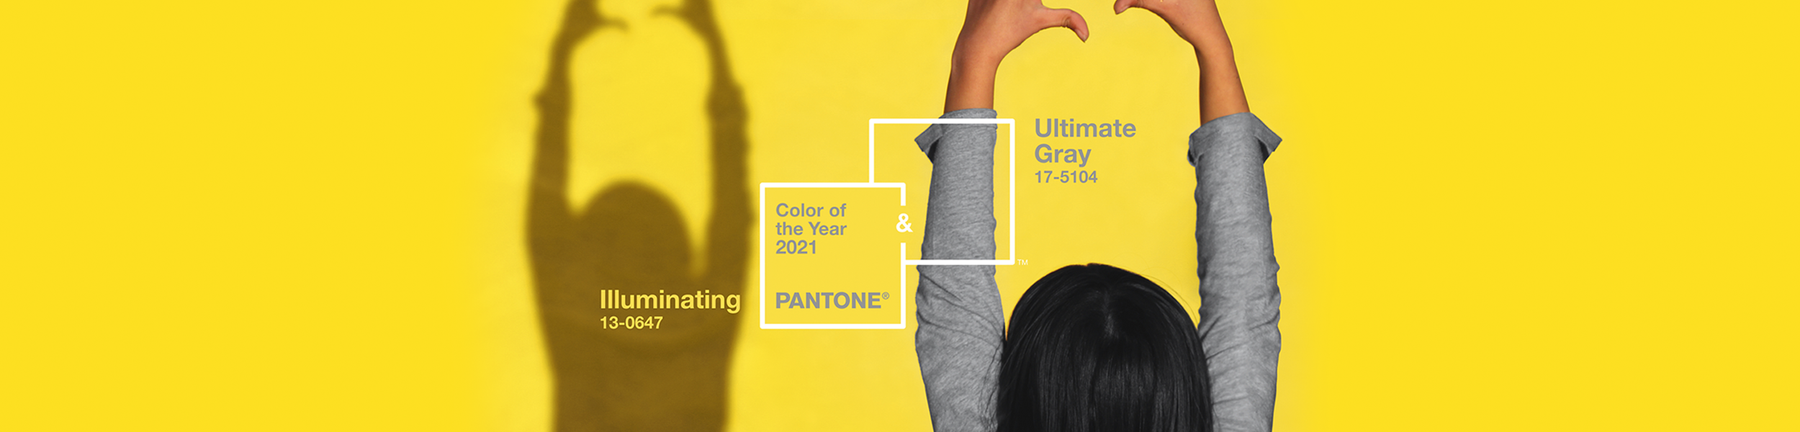 Pantone Color of the Year 2021 Has Been Revealed